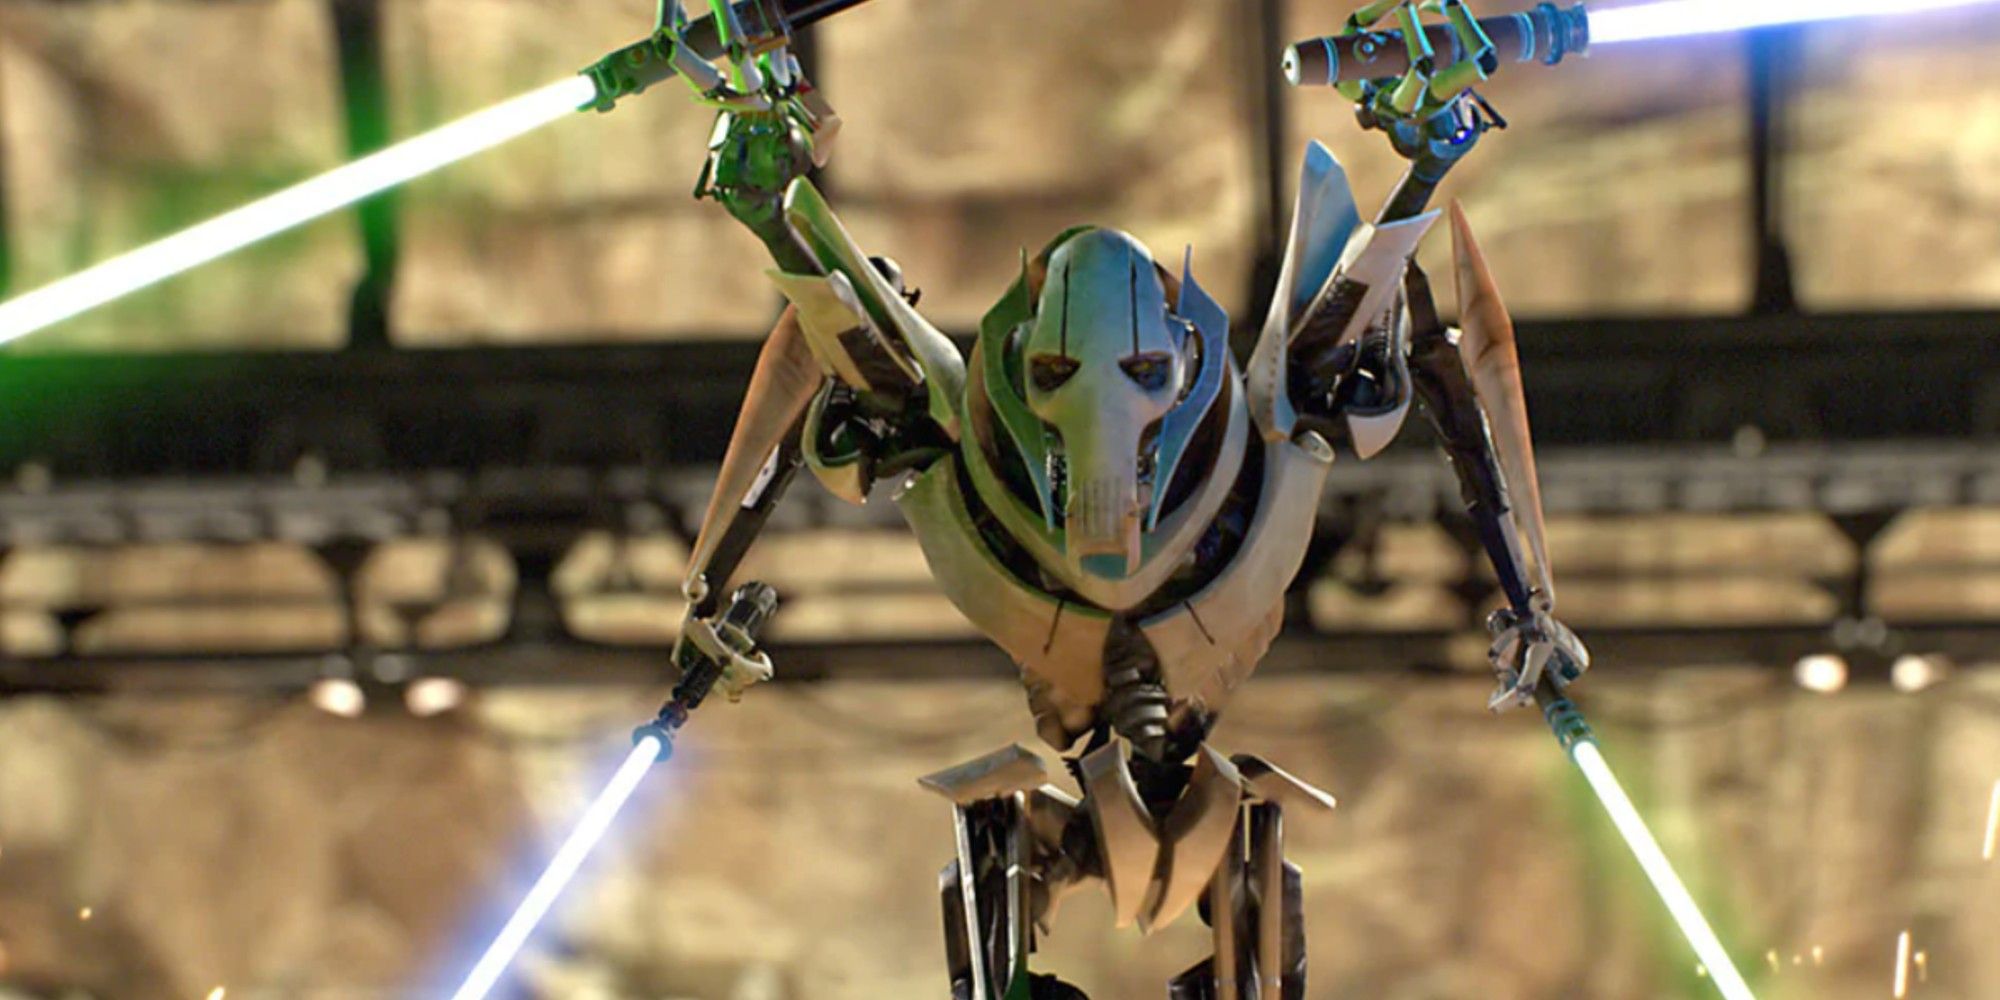 General Grievous shows off his four arms and lightsabers as he prepares to duel Obi-Wan on Utapau in Revenge of the Sith